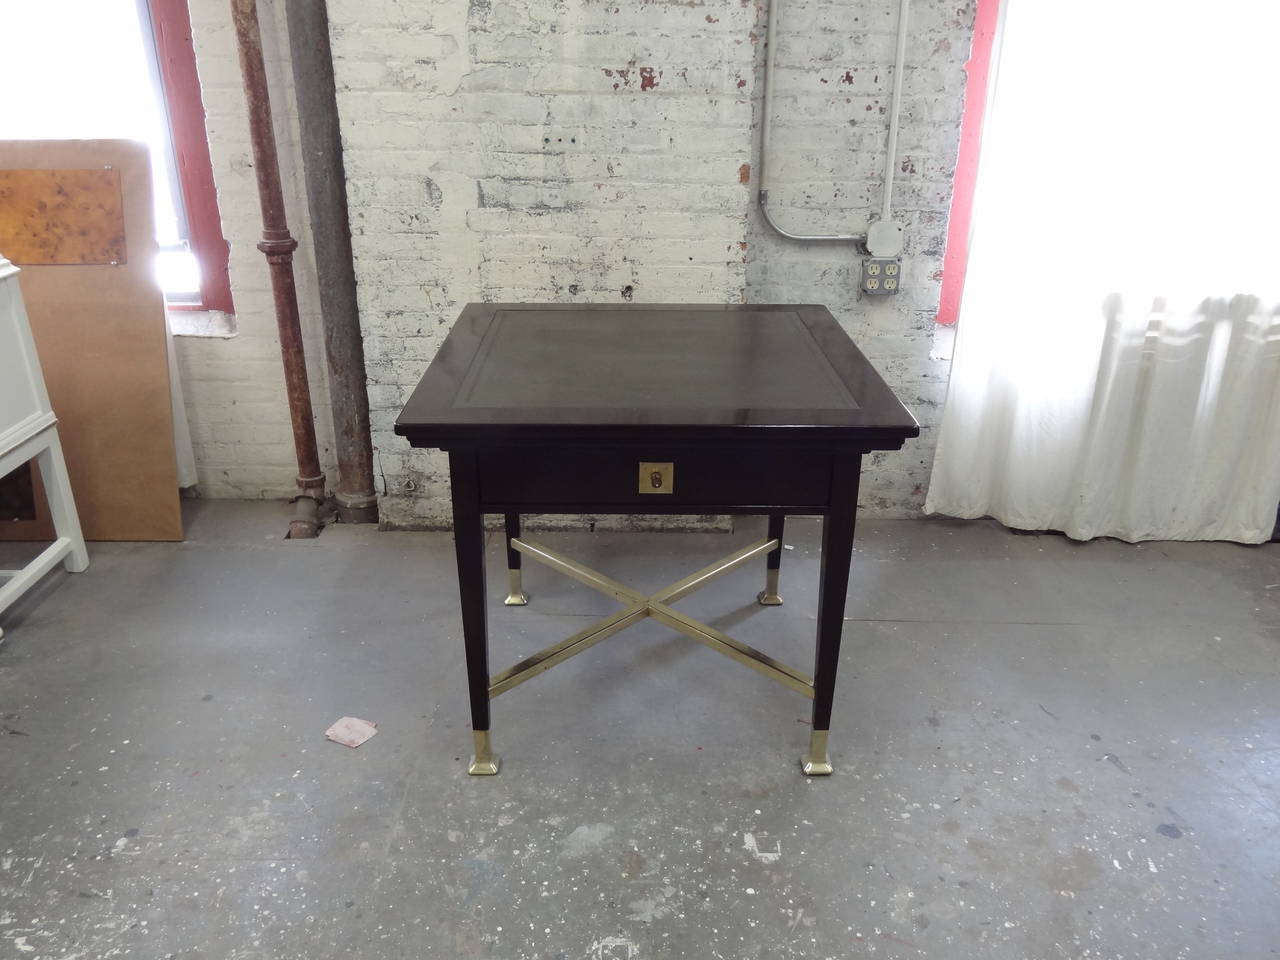 An unusual Austrian Secessionist period card table with four synchronized mechanical corner trays and one push-pull drawer, each tray with brass lined cigar rest, drink recess and flip-out tray, the trays are linked by a hidden wooden gear mechanism